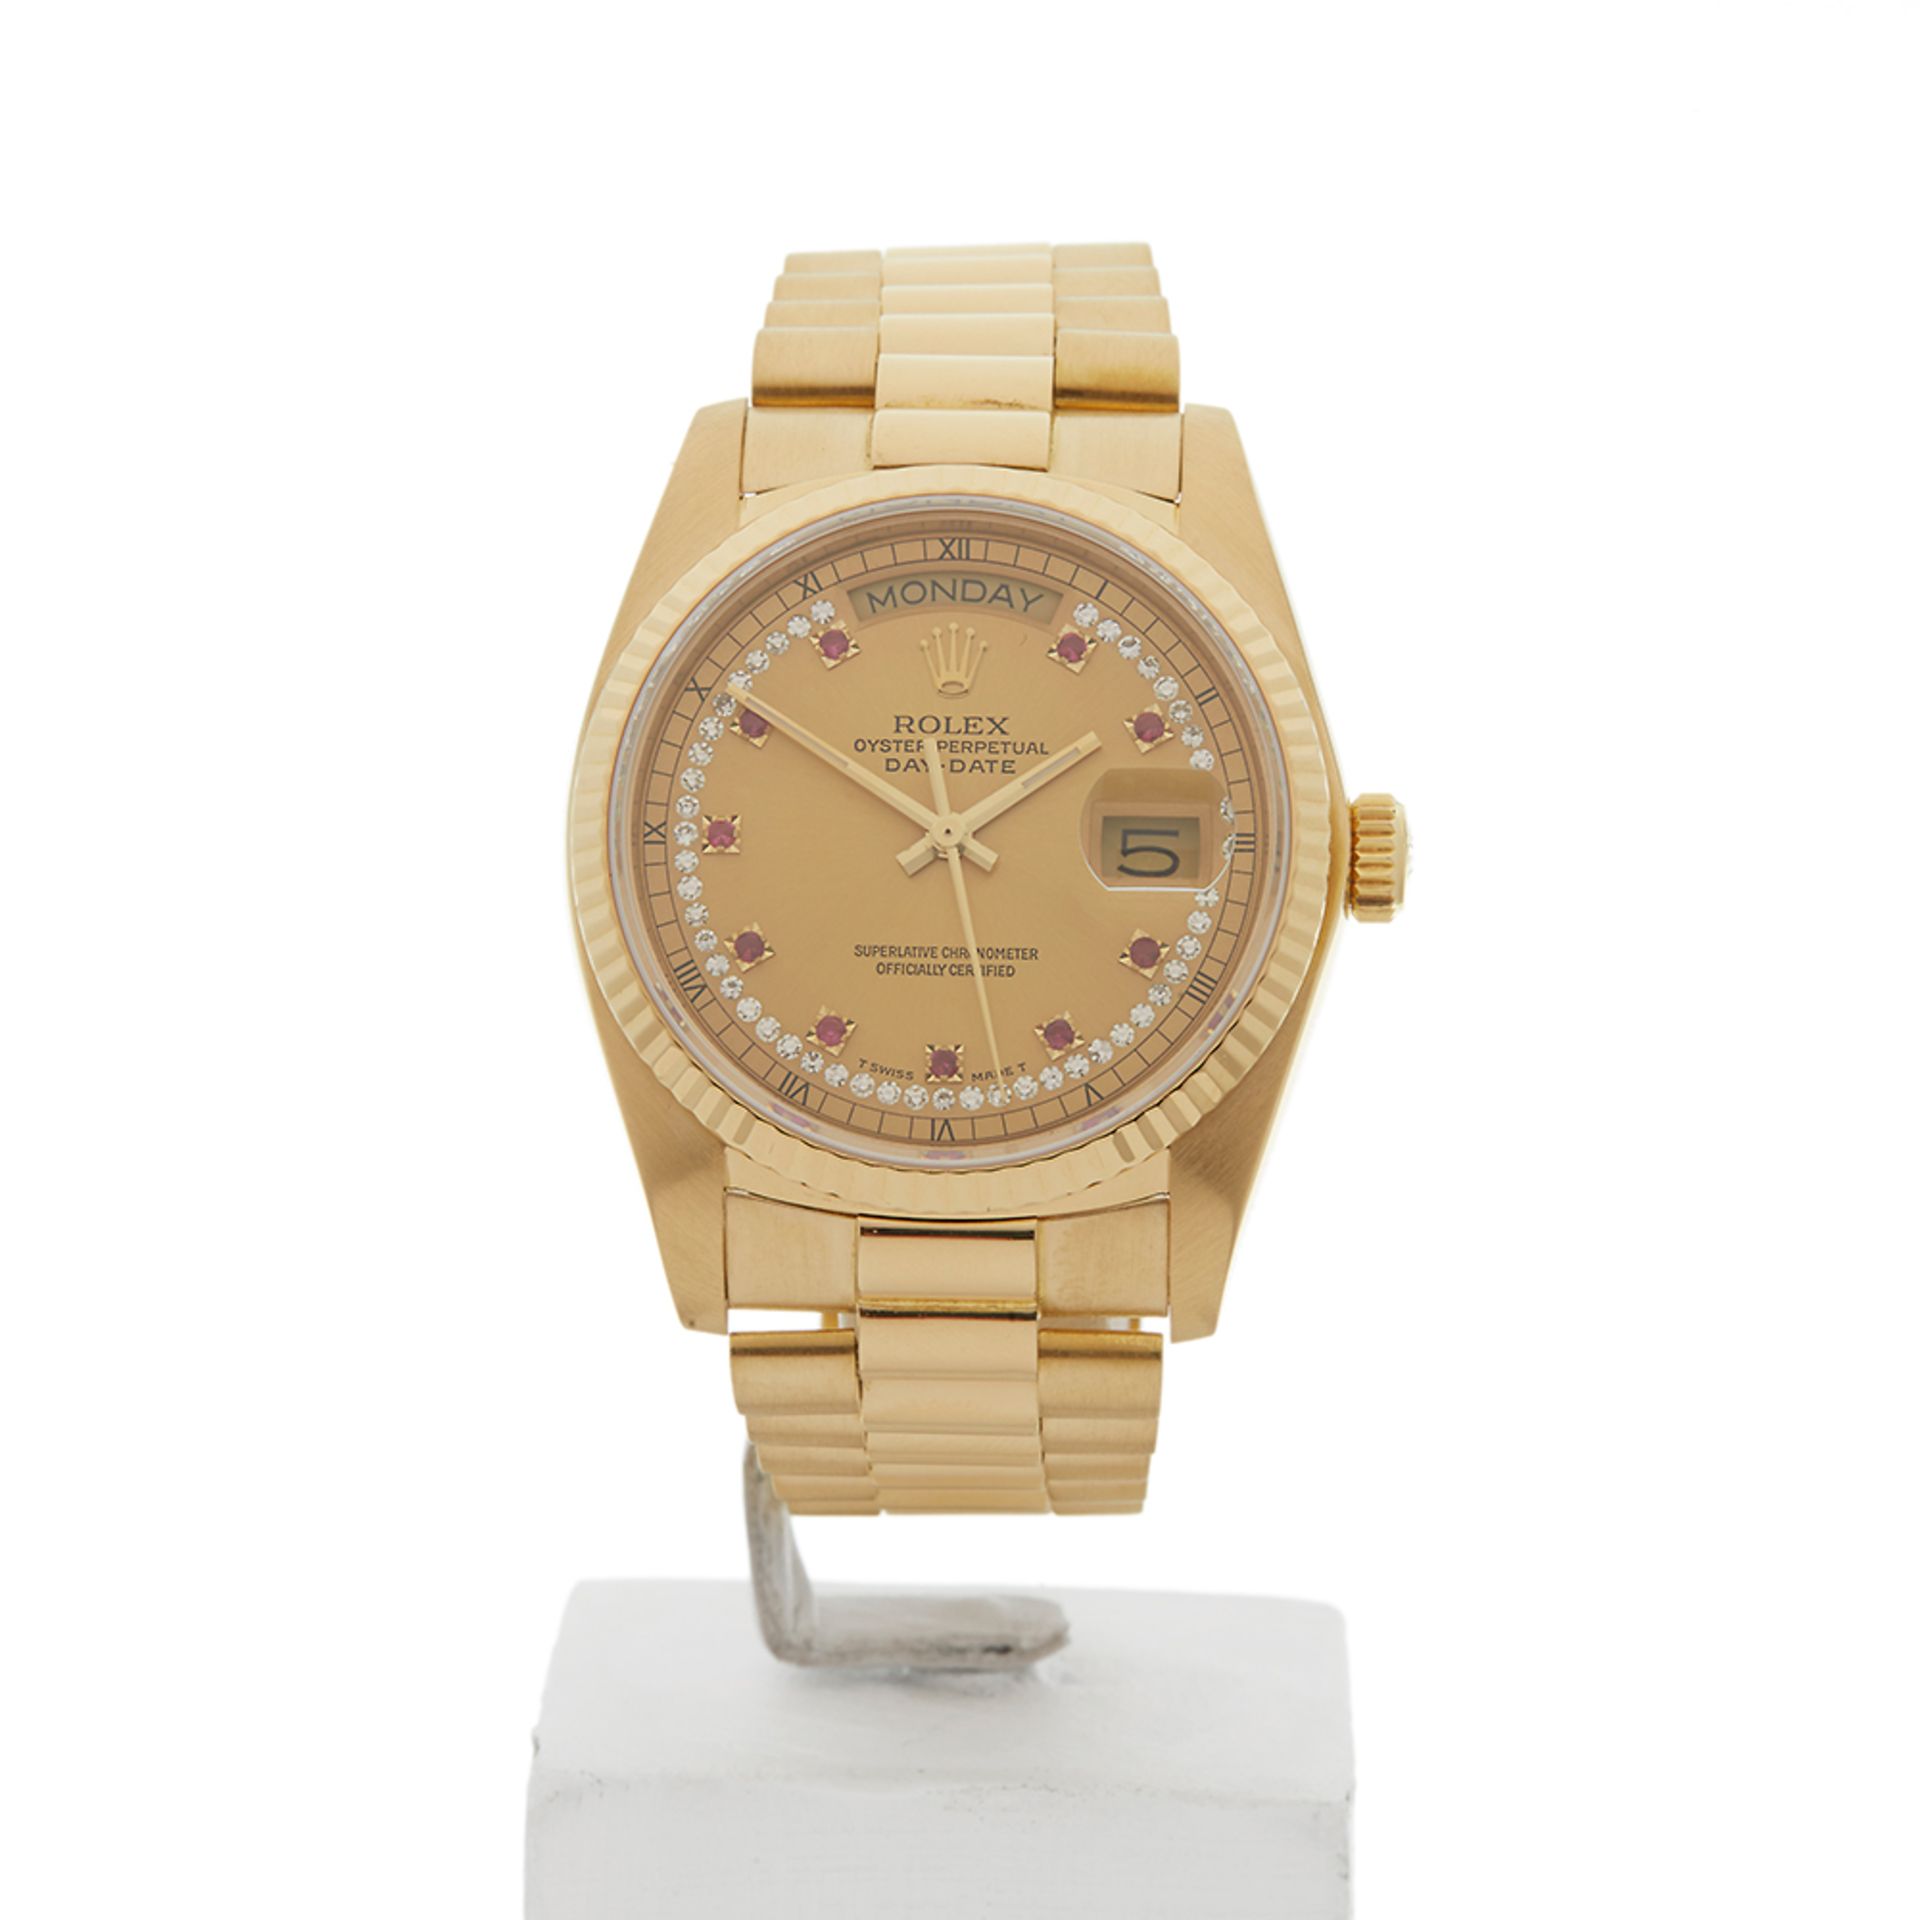 Rolex Day-Date 36mm 18k Yellow Gold 18038 - Image 2 of 9